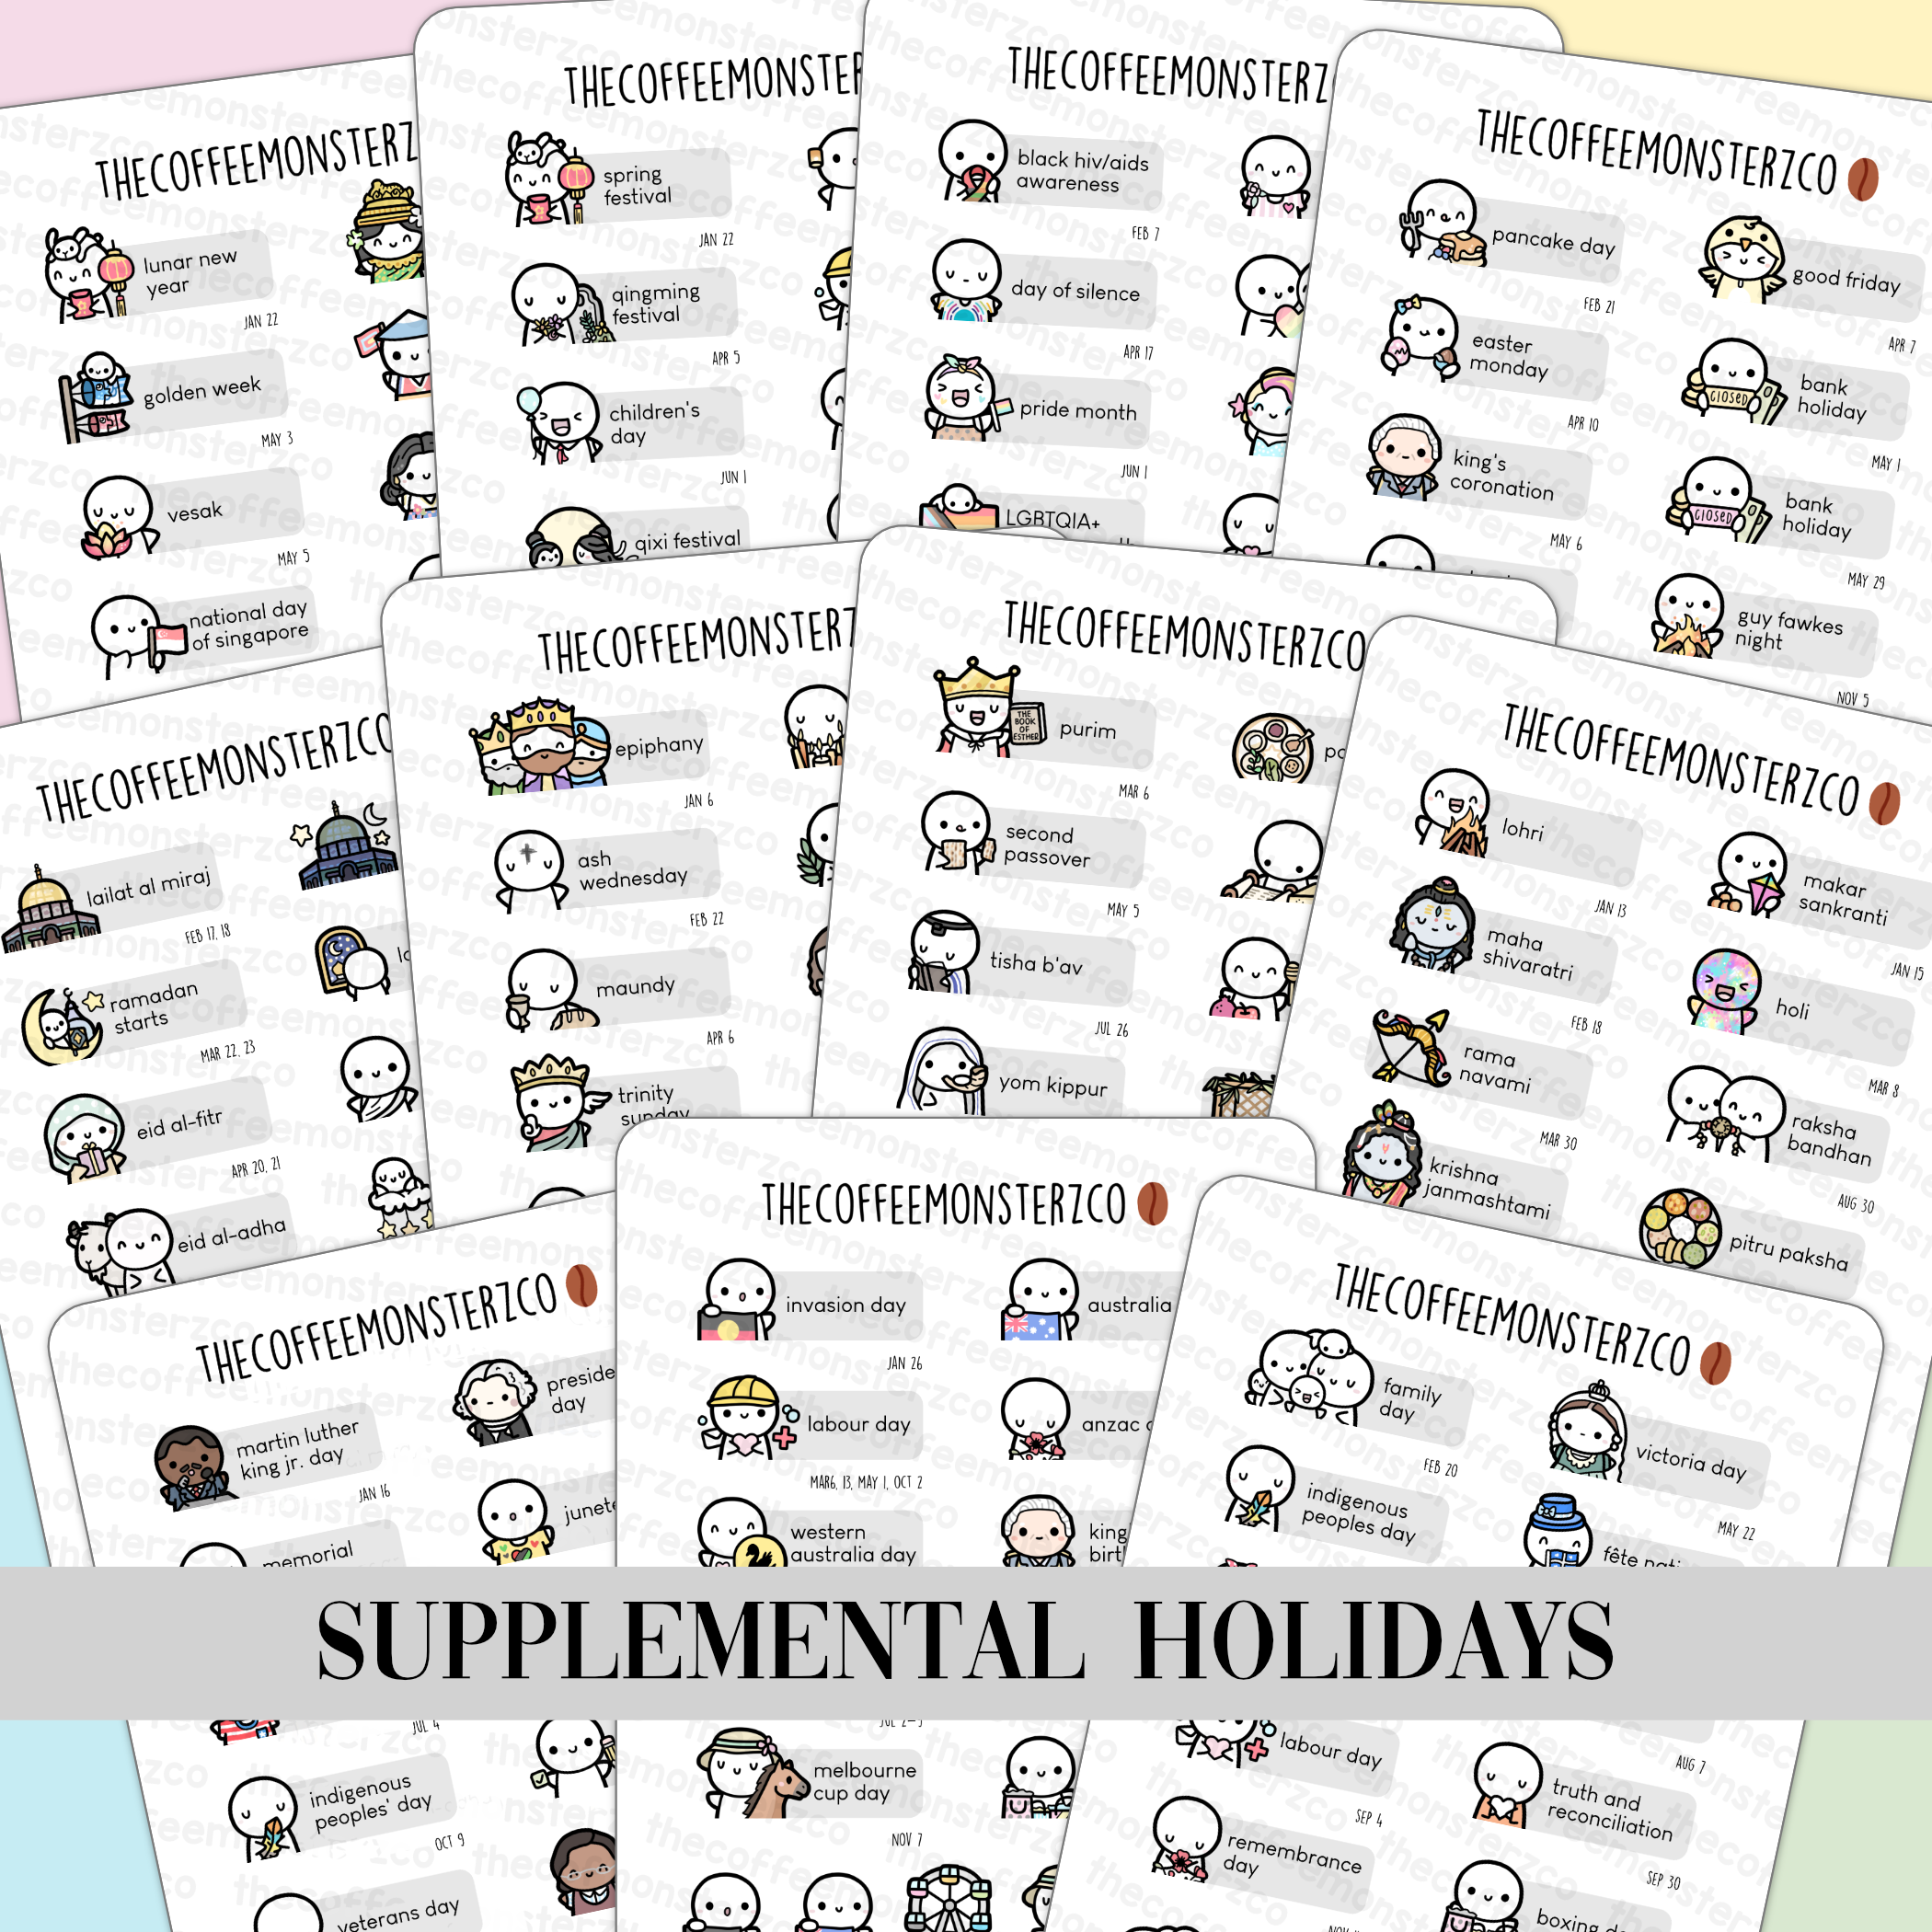 2023 Supplemental Holiday Stickers